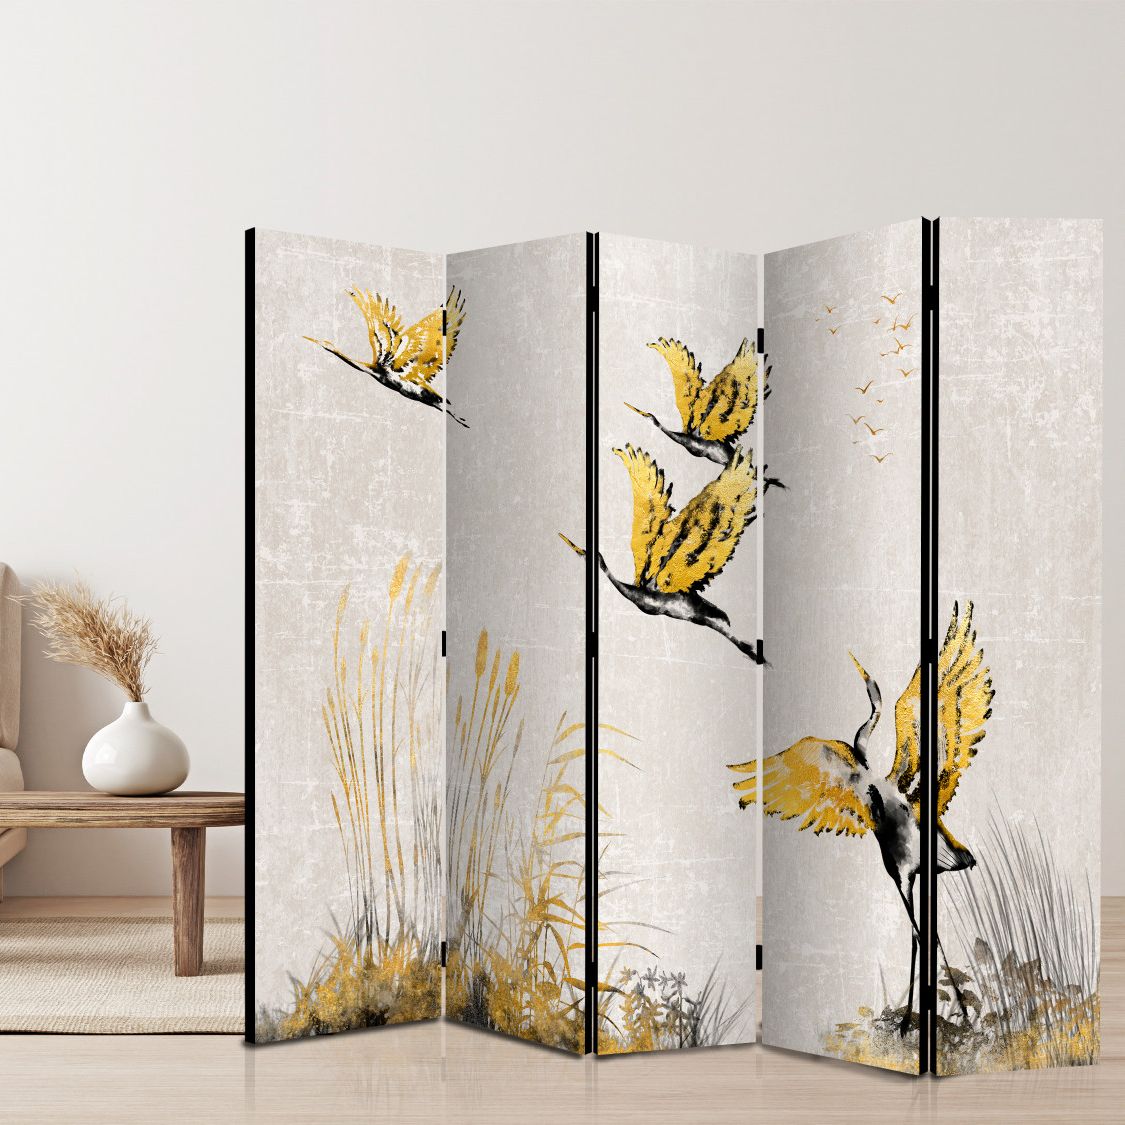 5 panels room divider screen with printed design of yellow birds just taking off, this folding screen is standing on a living room with rustical design